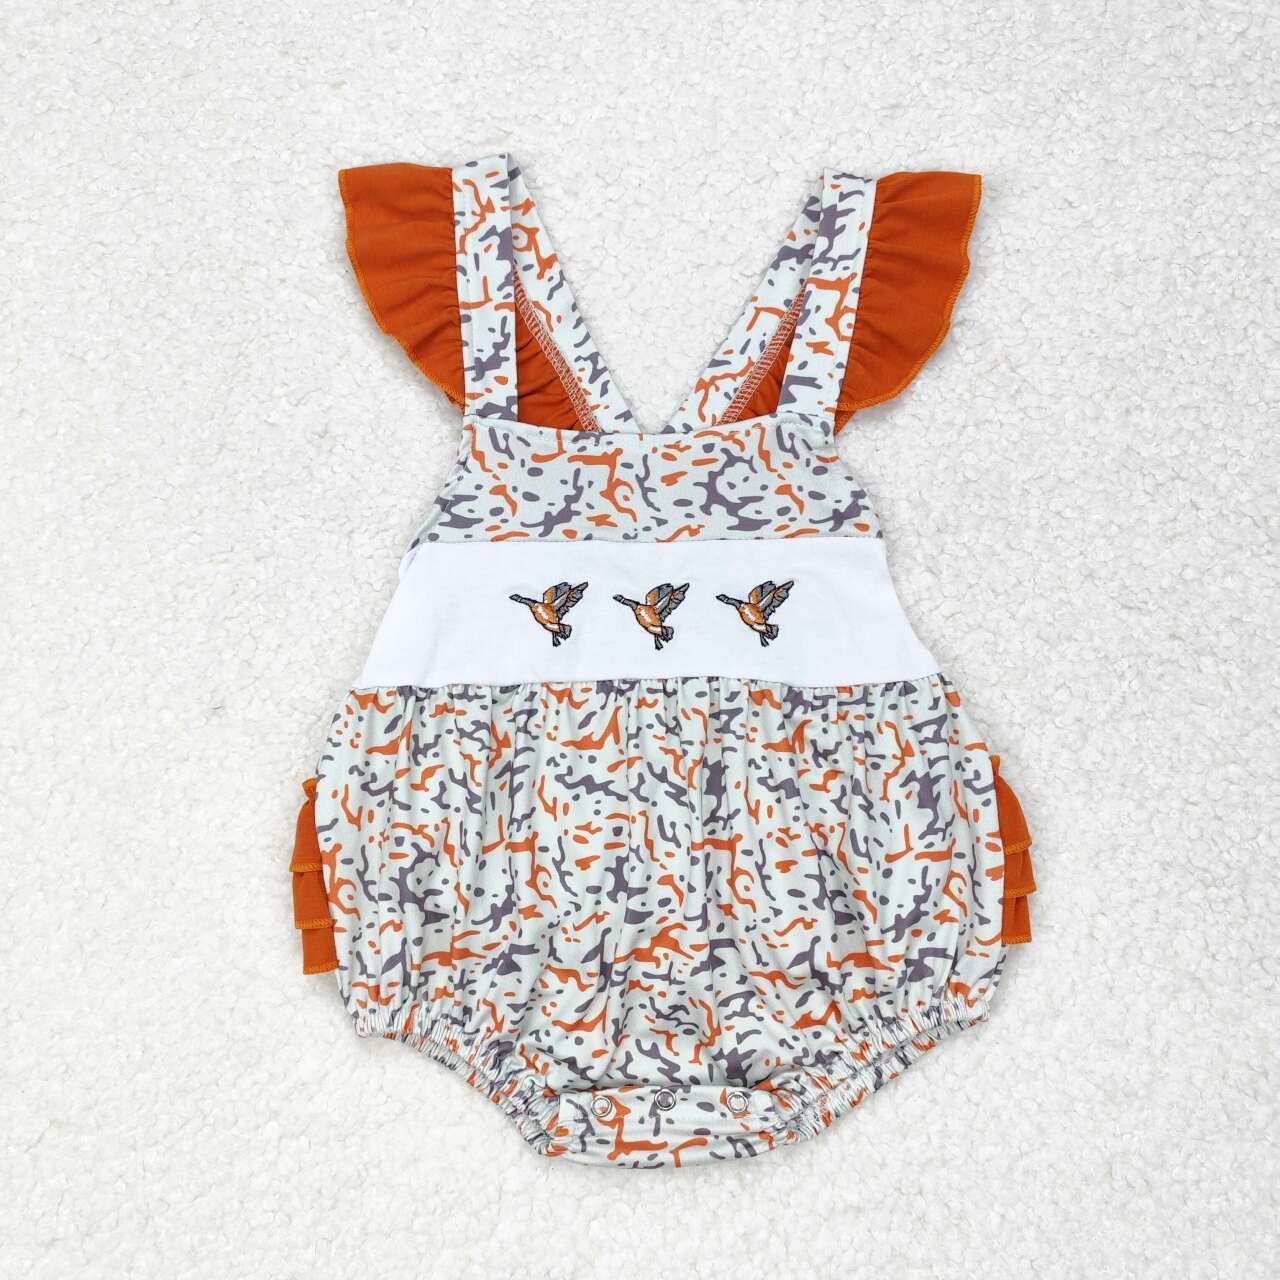 Duck Embroidery Camo Print Sibling Summer Matching Clothes